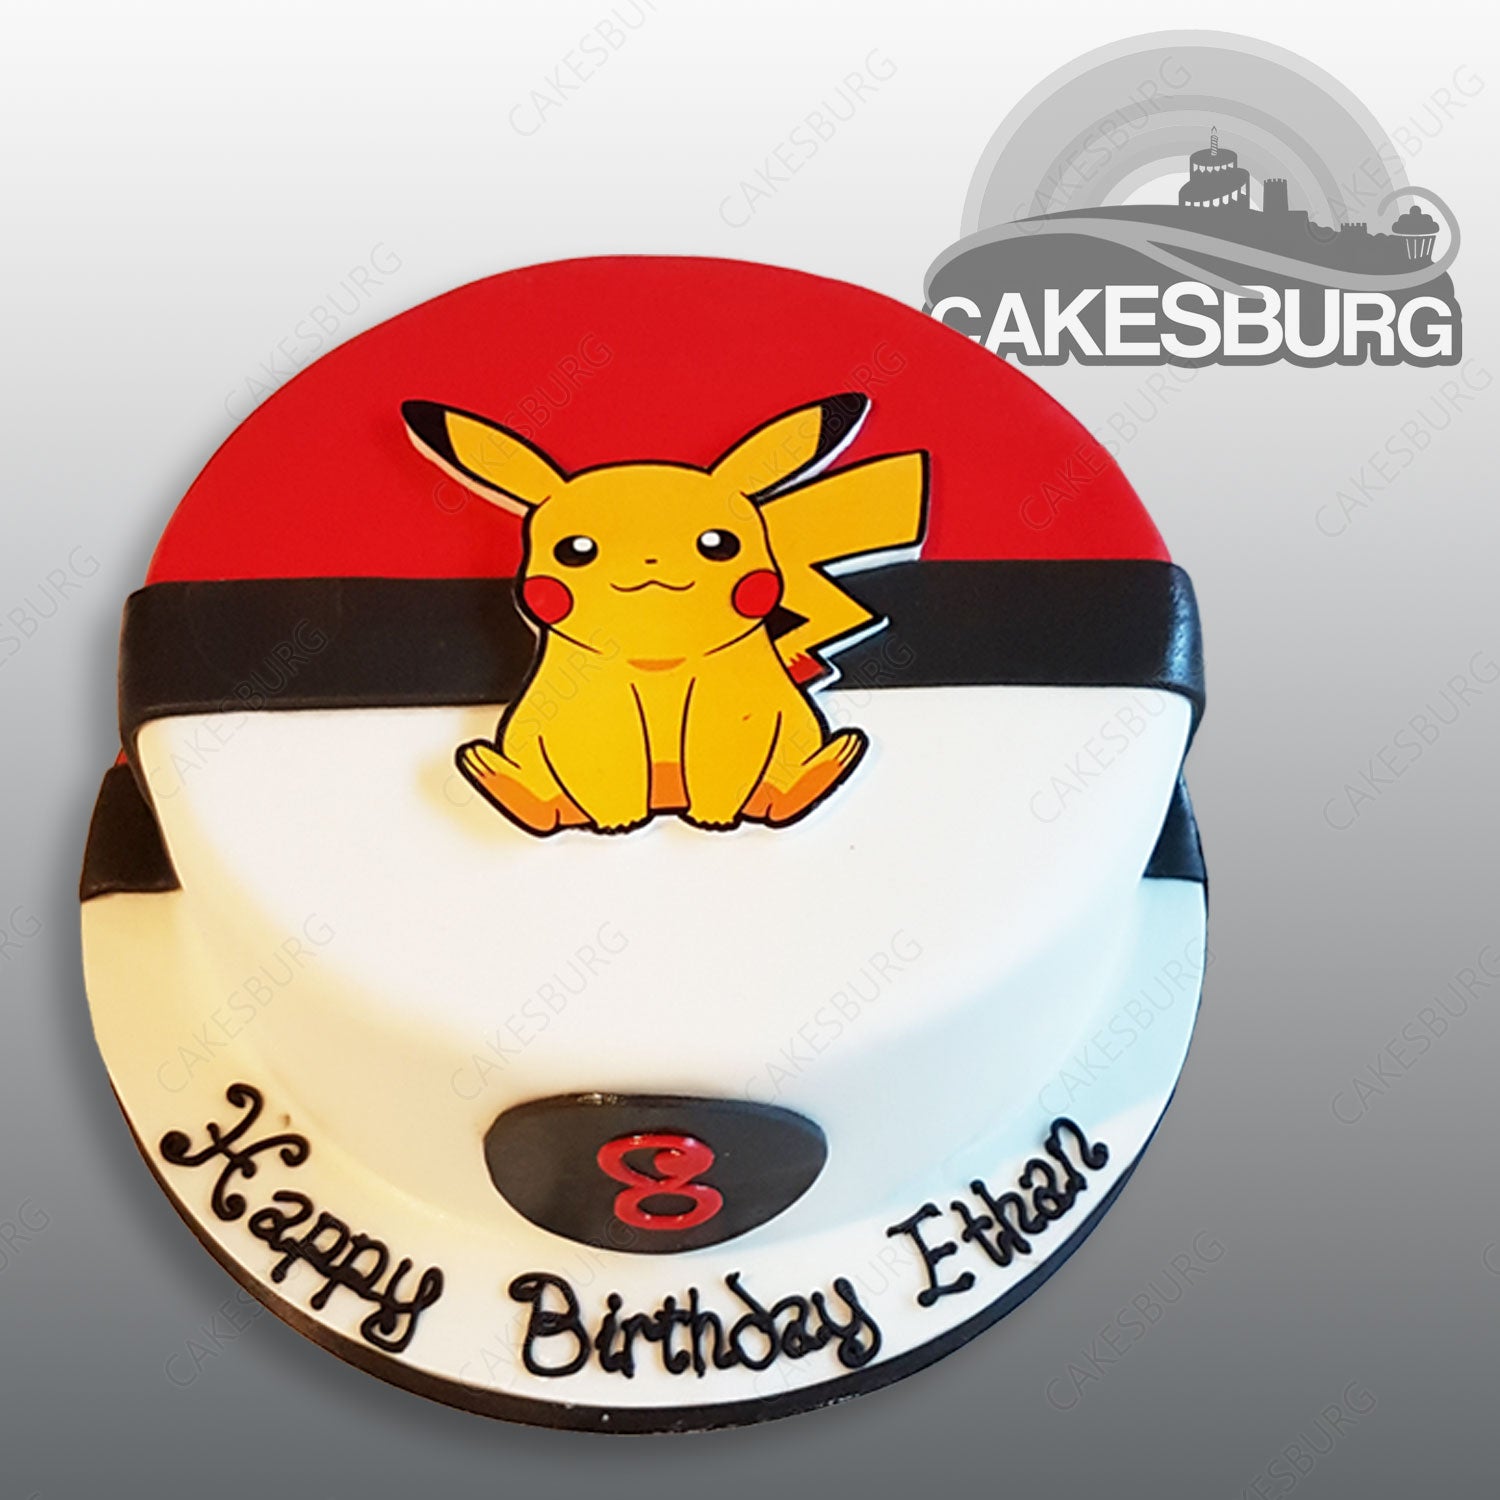 Pokemon Cakes are for all Occasions | Gurgaon Bakers